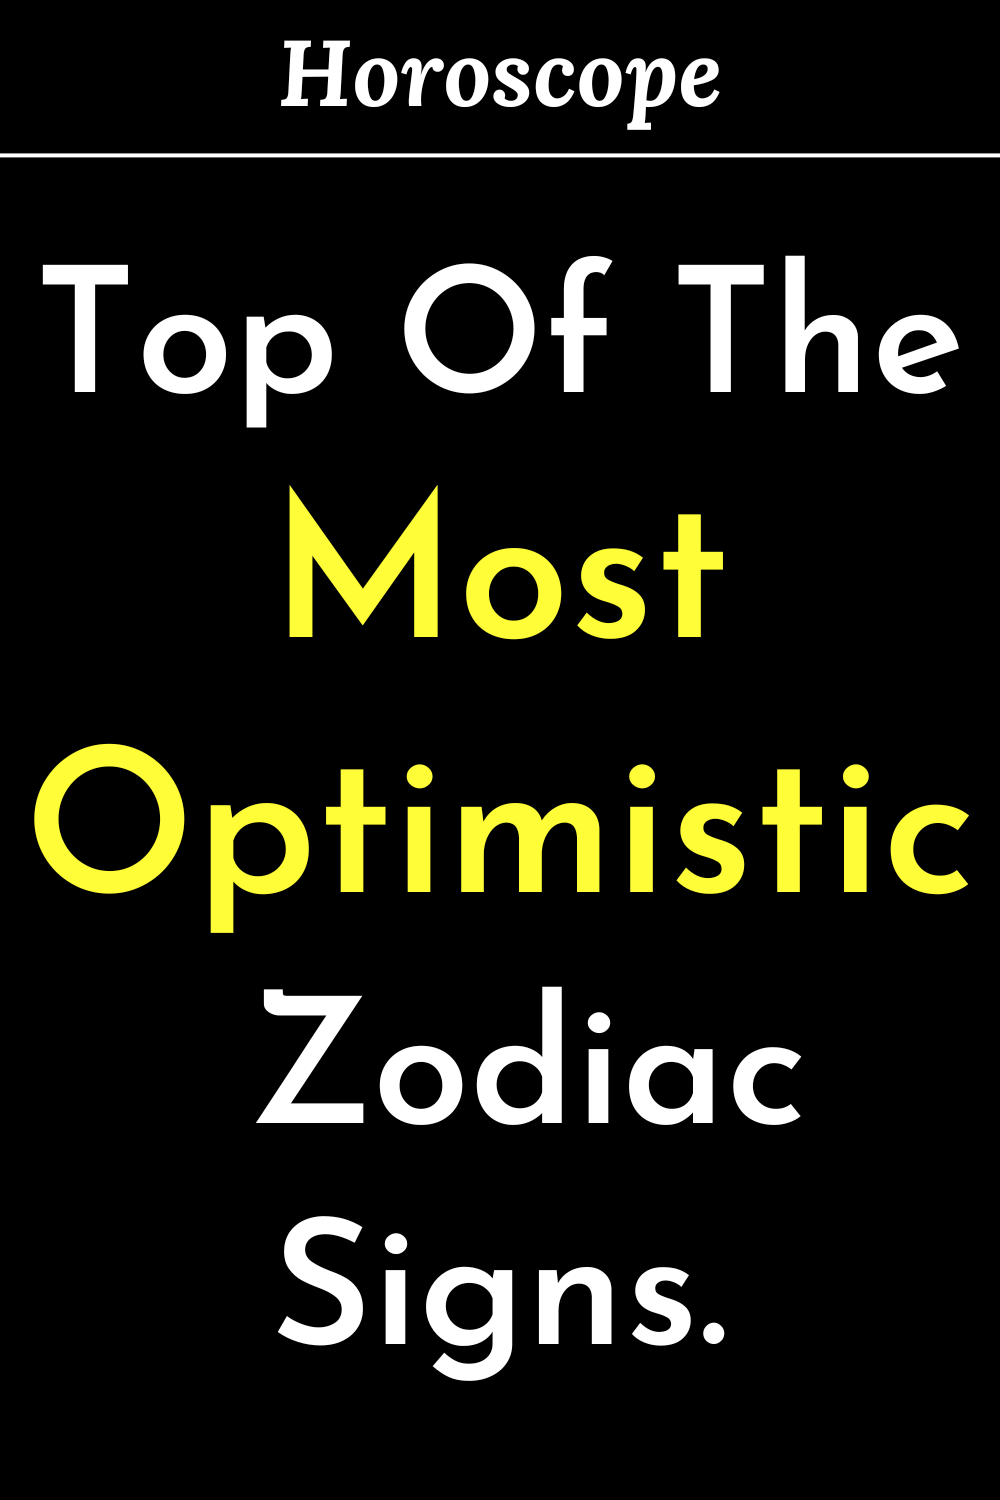 Top Of The Most Optimistic Zodiac Signs.